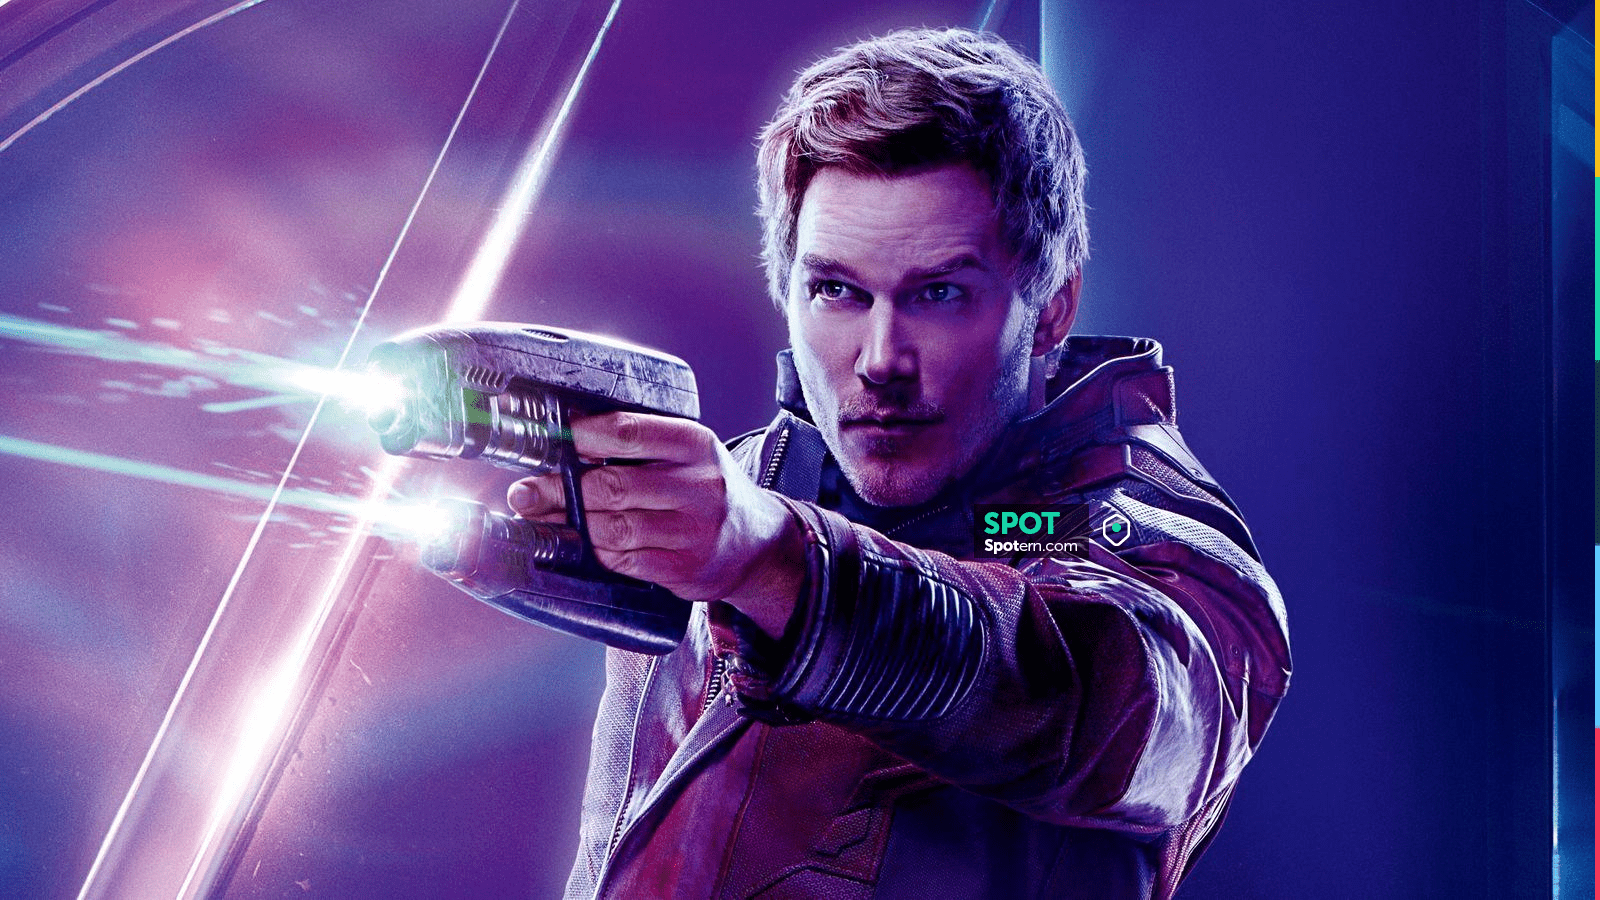 Real Leather Jacket Of Peter Quill / Star Lord (Chris Pratt) In Guardians Of The Galaxy Vol. 2